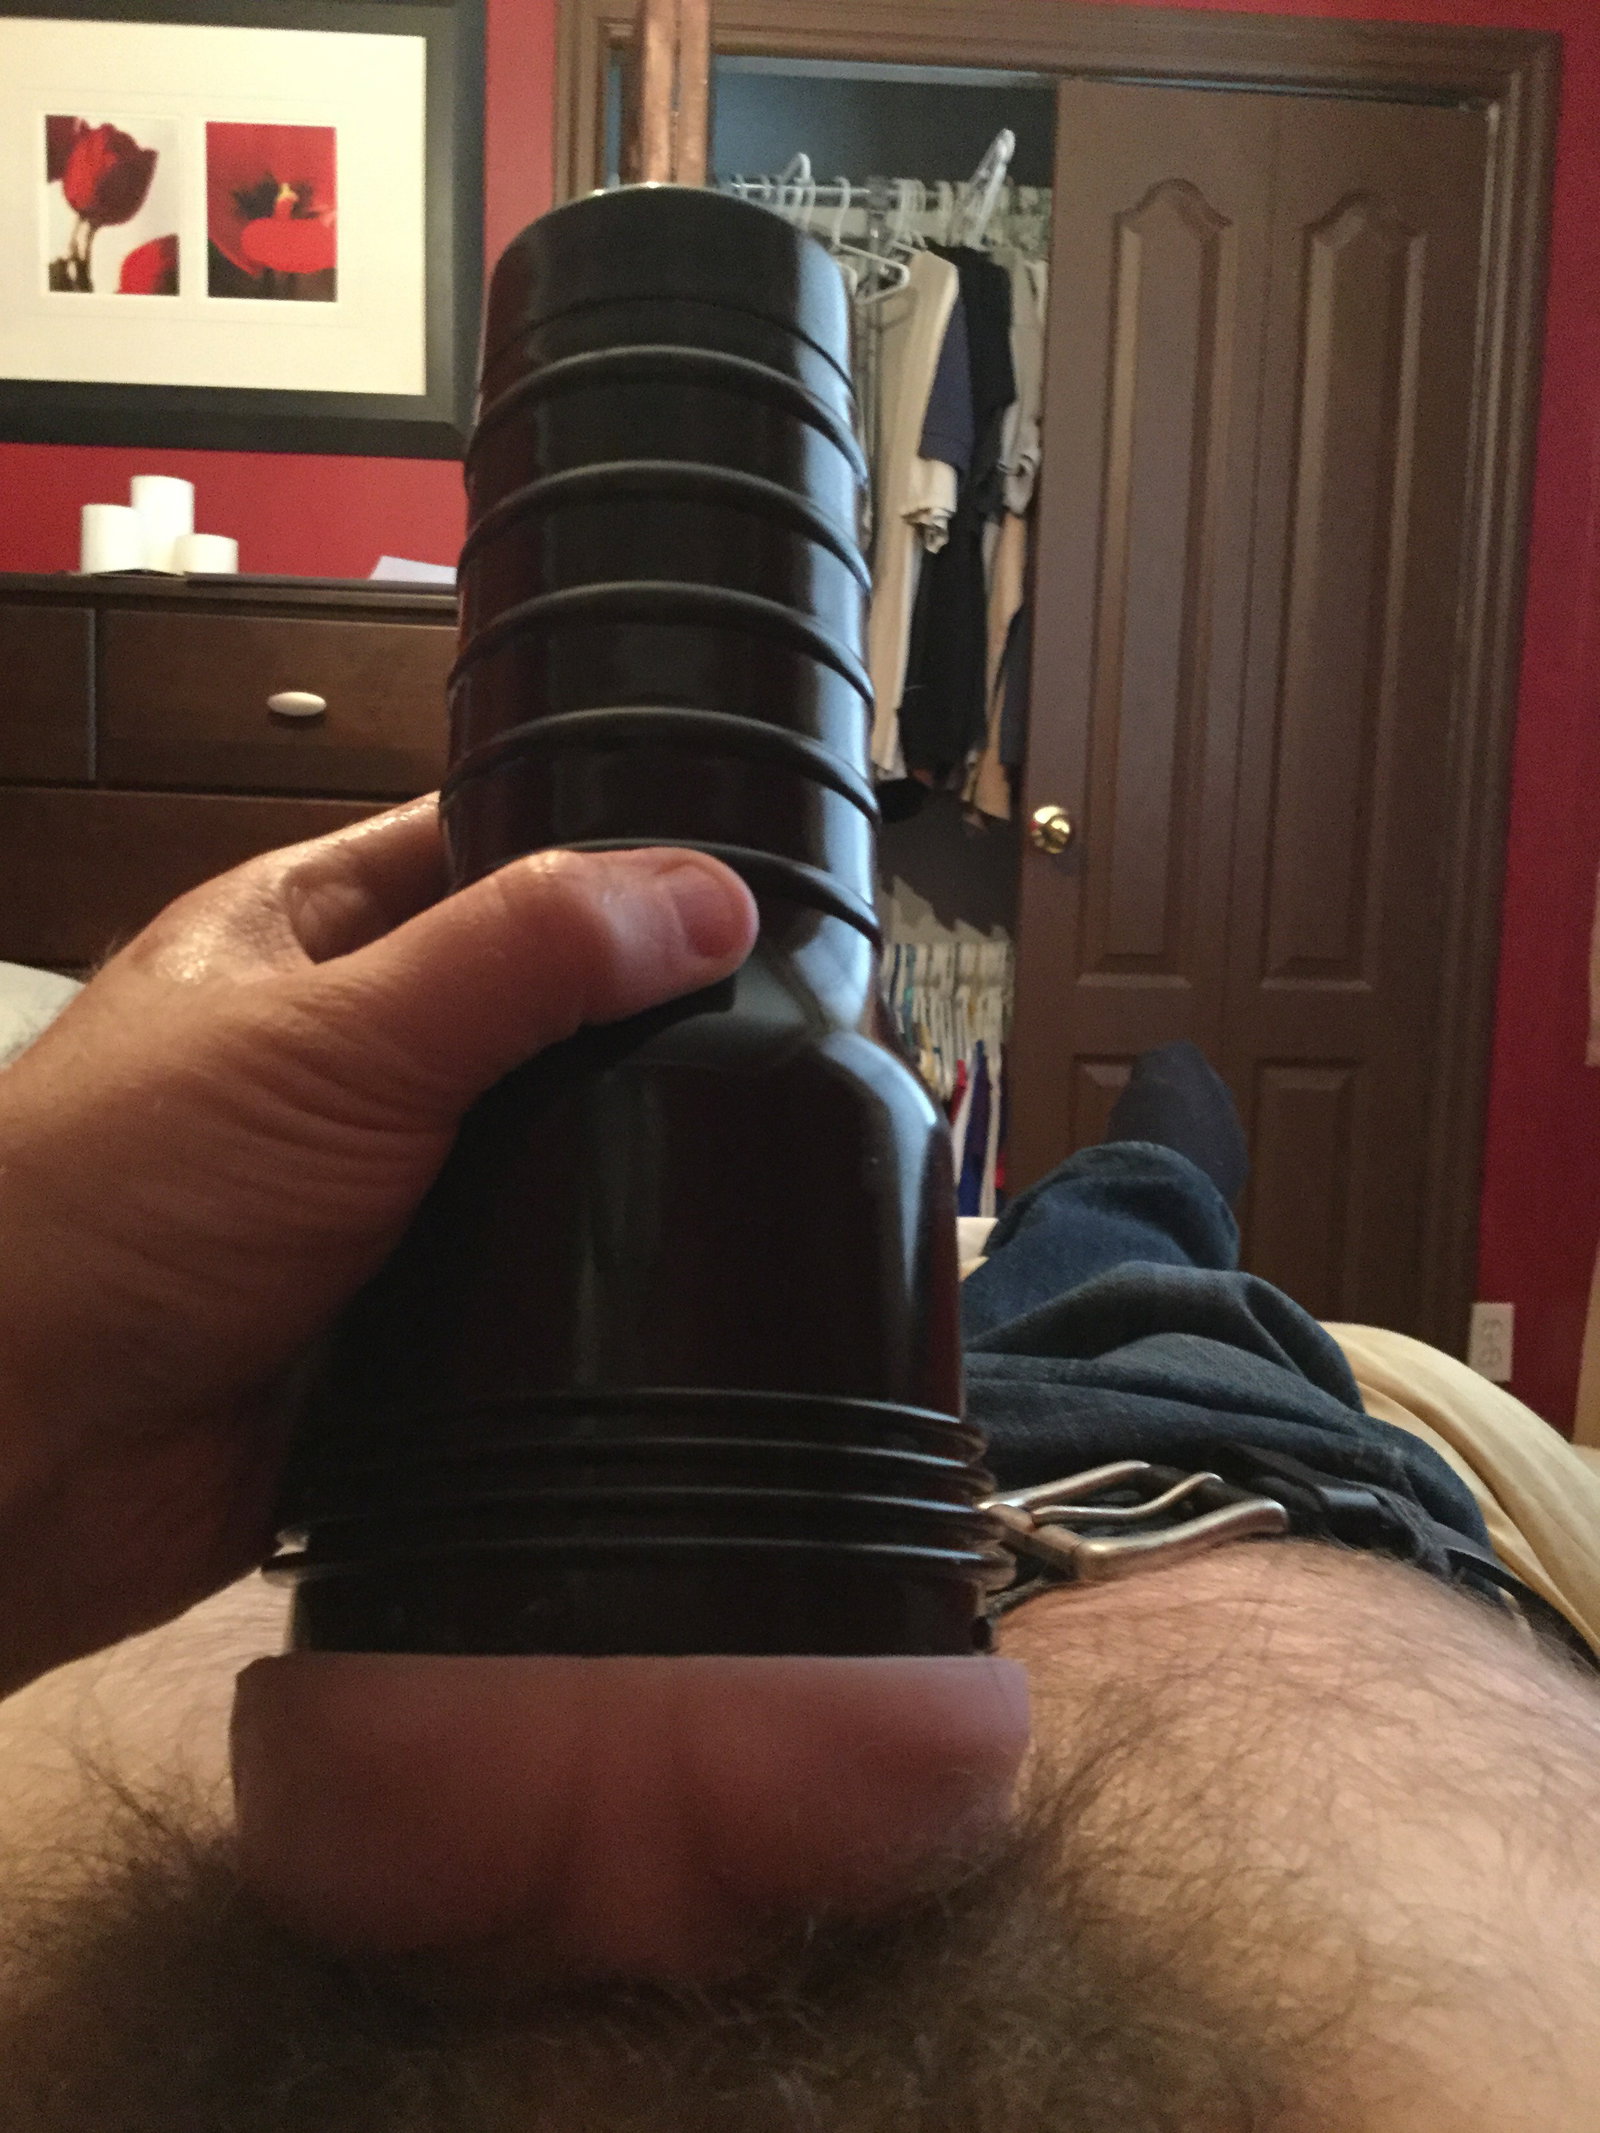 Watch the Photo by KonkeyDong80 with the username @KonkeyDong80, posted on April 5, 2019. The post is about the topic Submit your own toys. and the text says 'Me using my Fleshlight.  This was before I trimed my pubes so enjoy the bush'